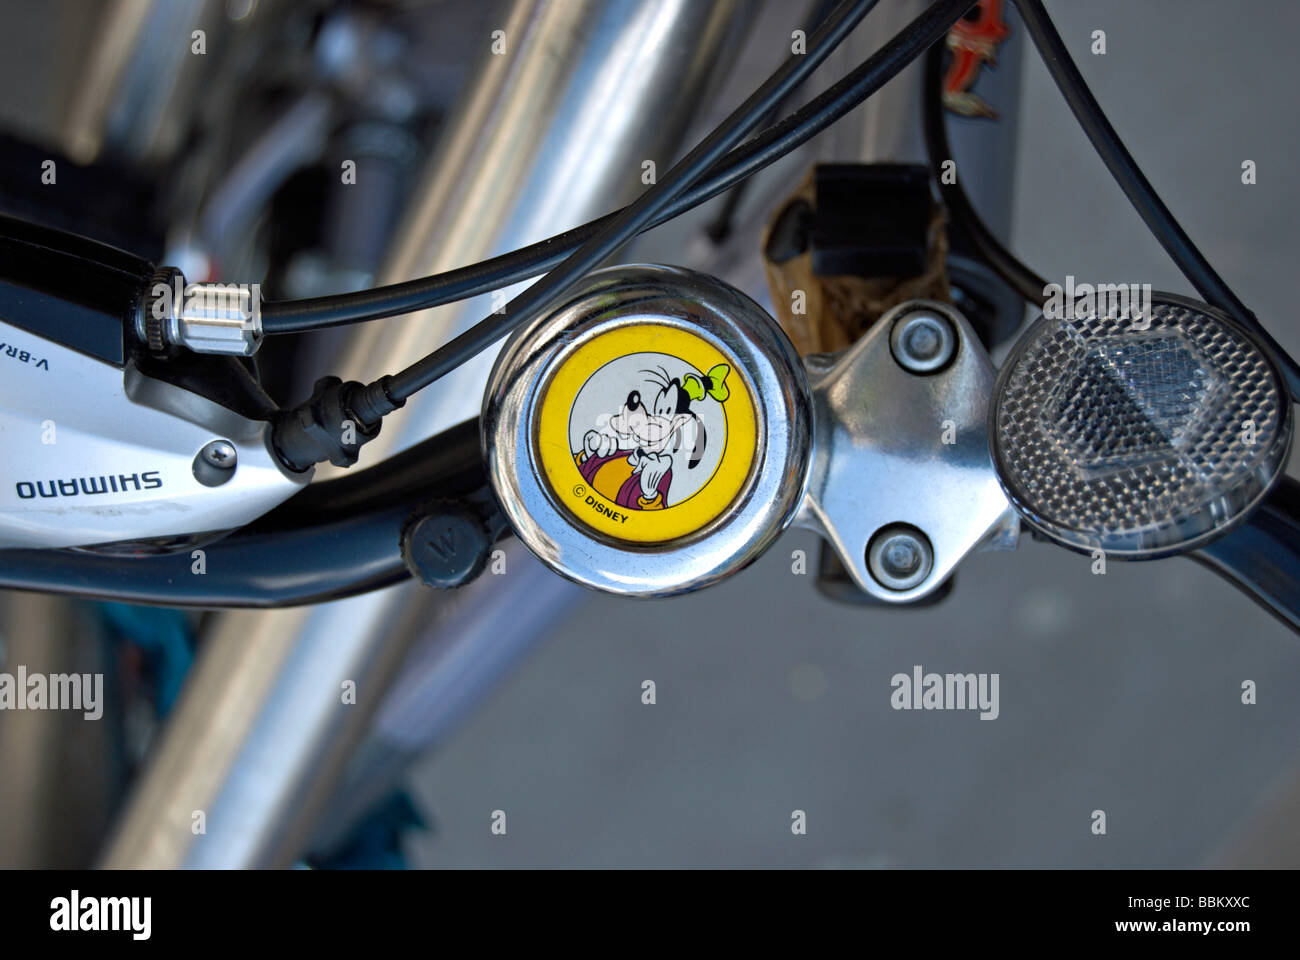 image of the disney character goofy on a bike bell,  in hammersmith, west london, england Stock Photo